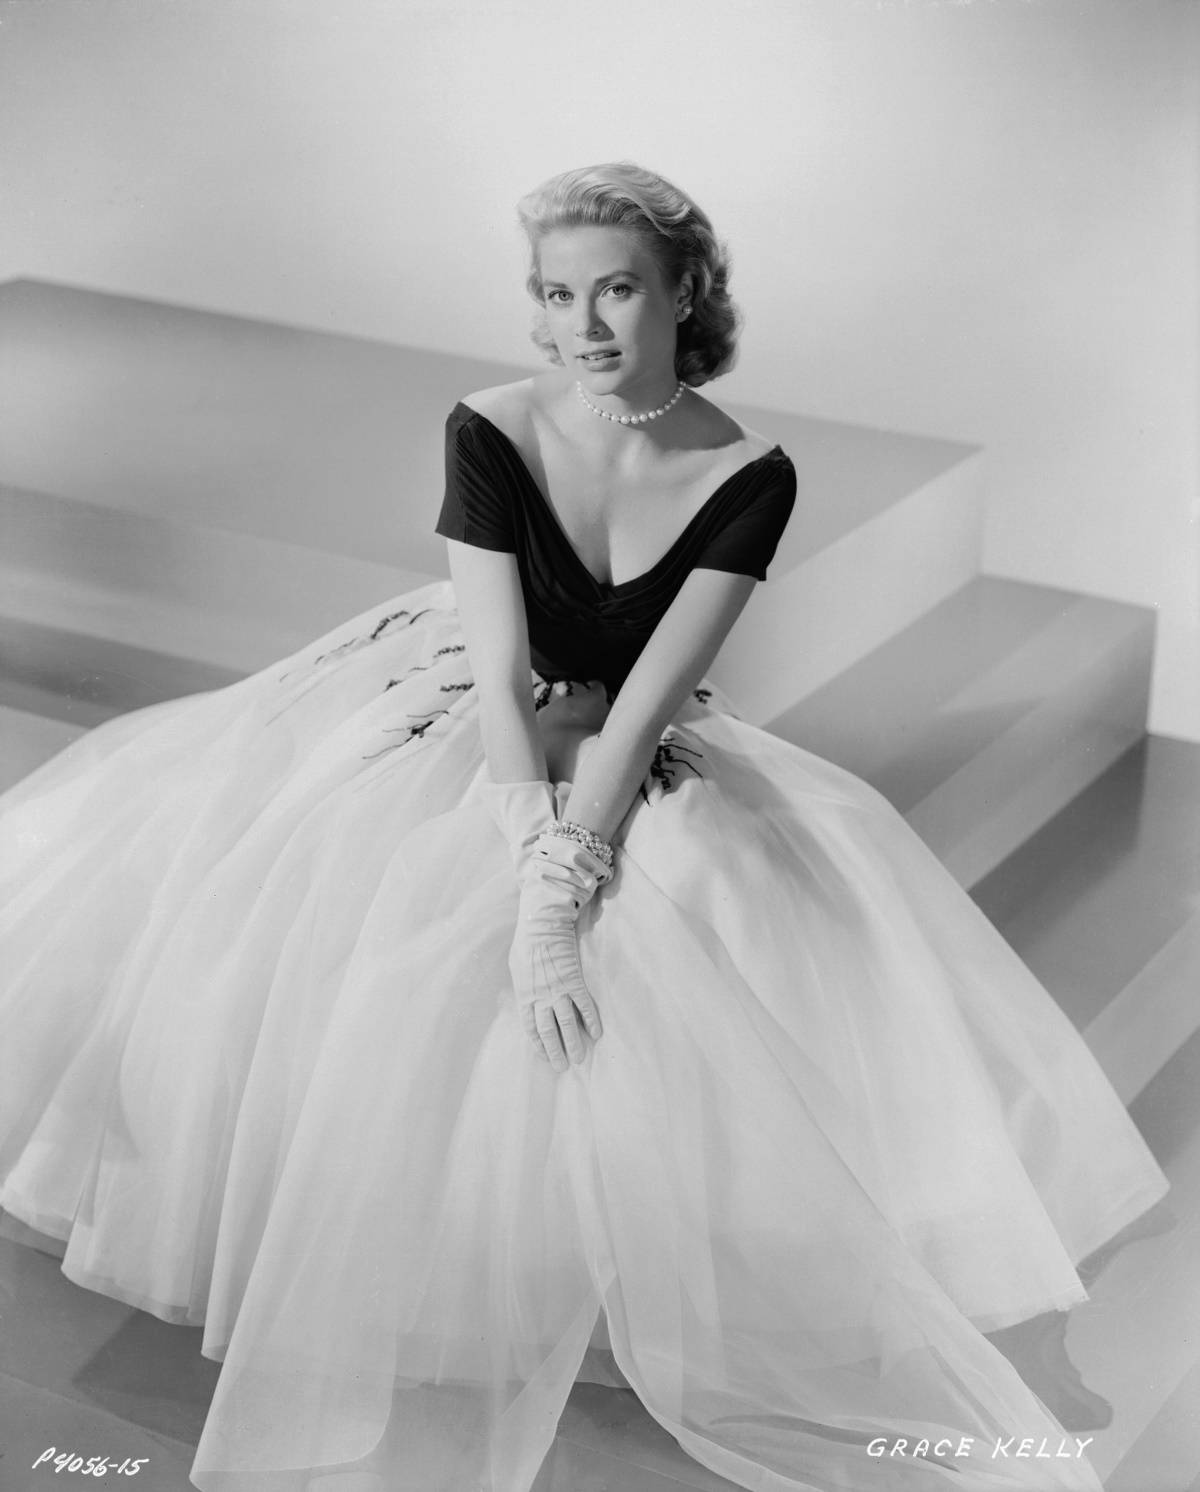 Grace Kelly (Fot. Getty Images)